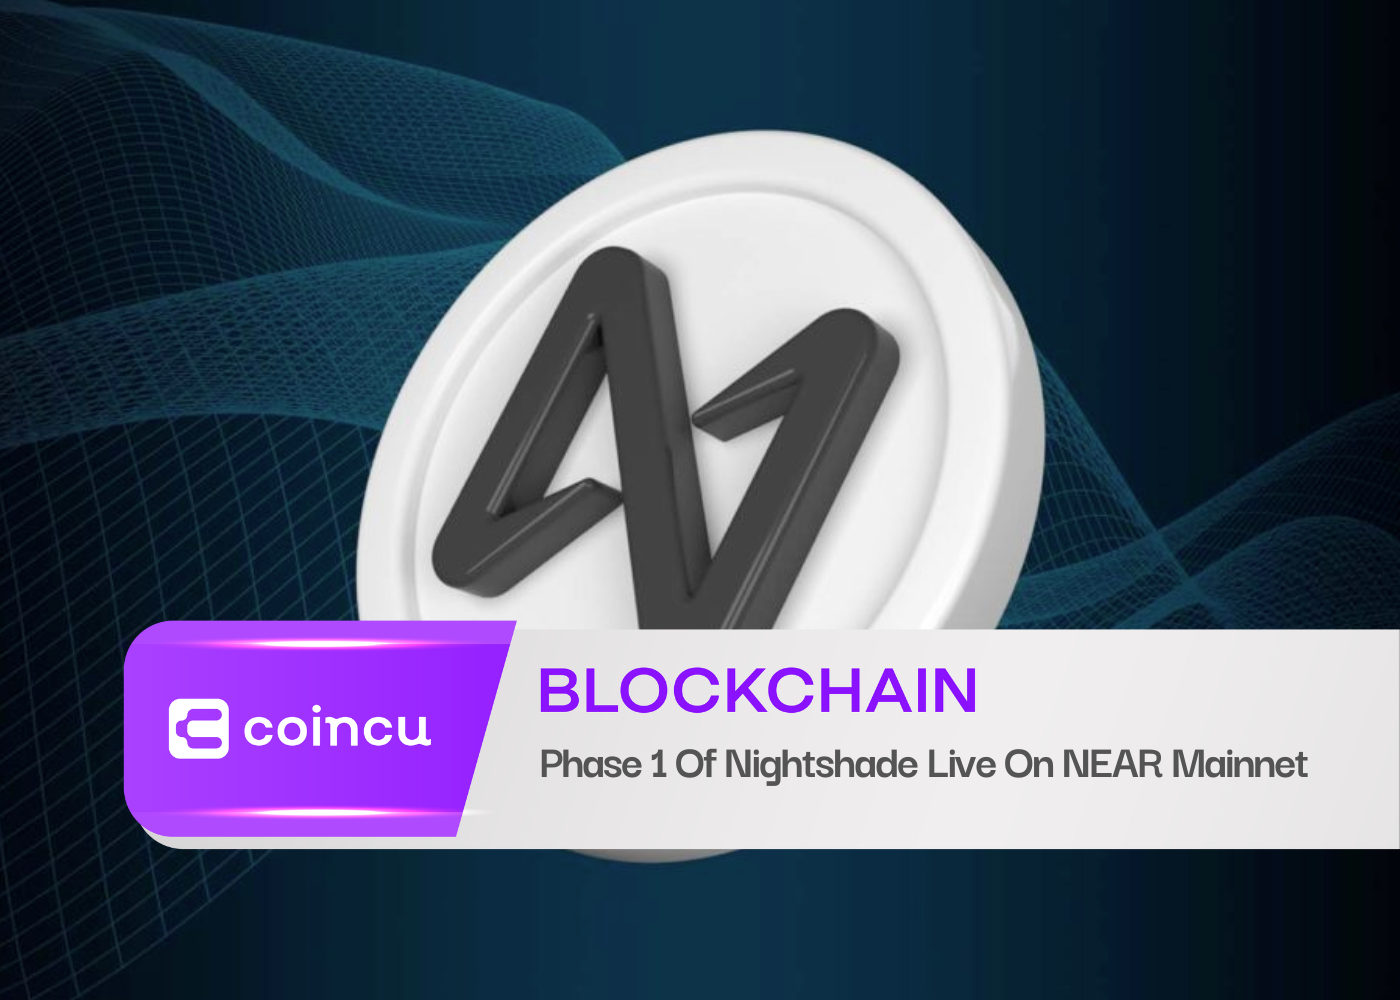 Phase 1 Of Nightshade Live On NEAR Mainnet